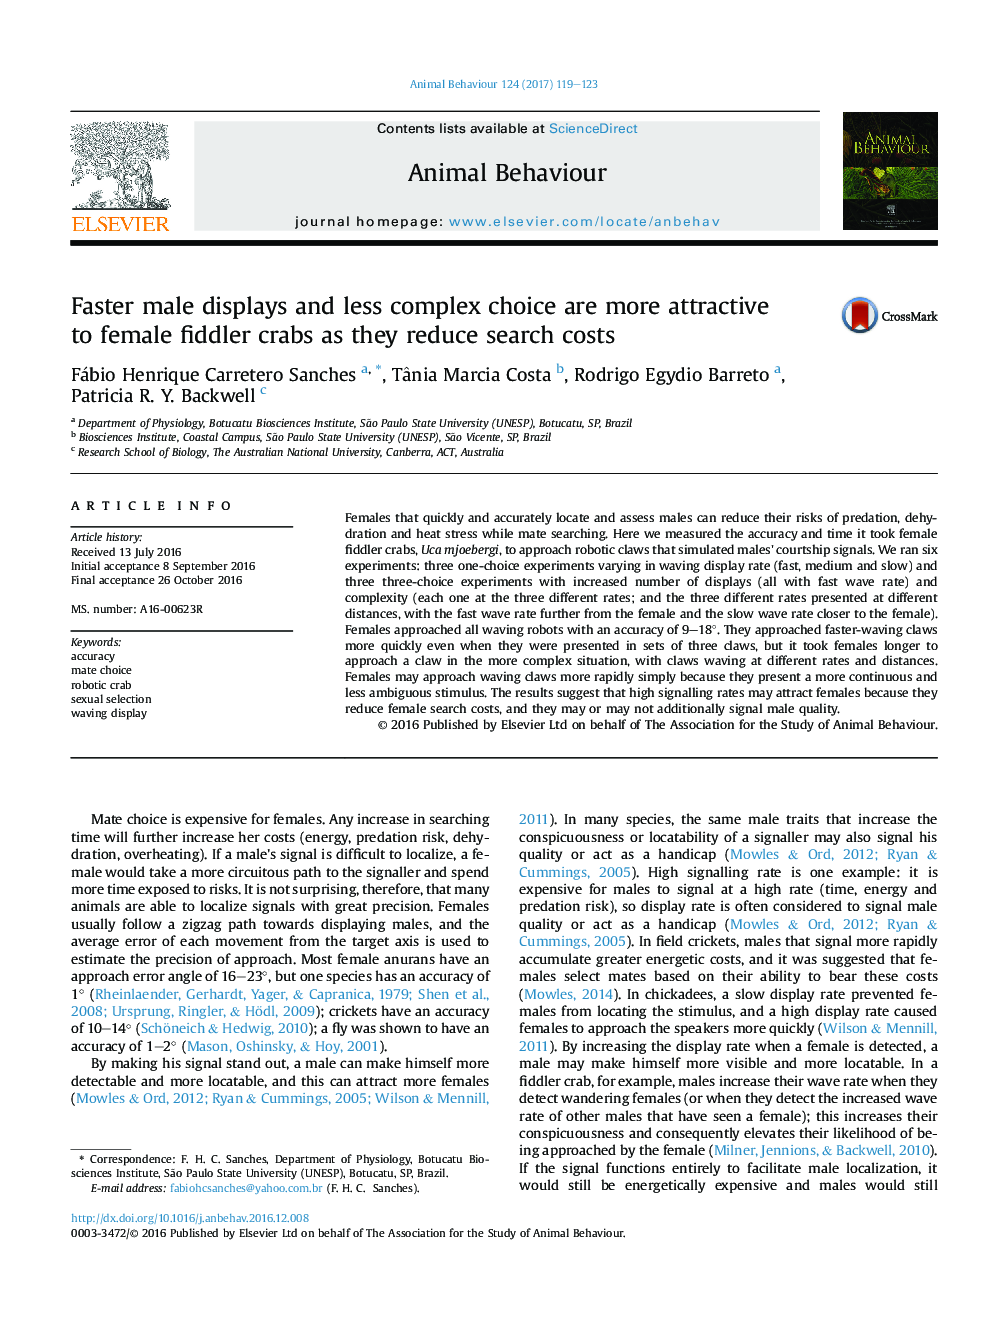 Faster male displays and less complex choice are more attractive to female fiddler crabs as they reduce search costs